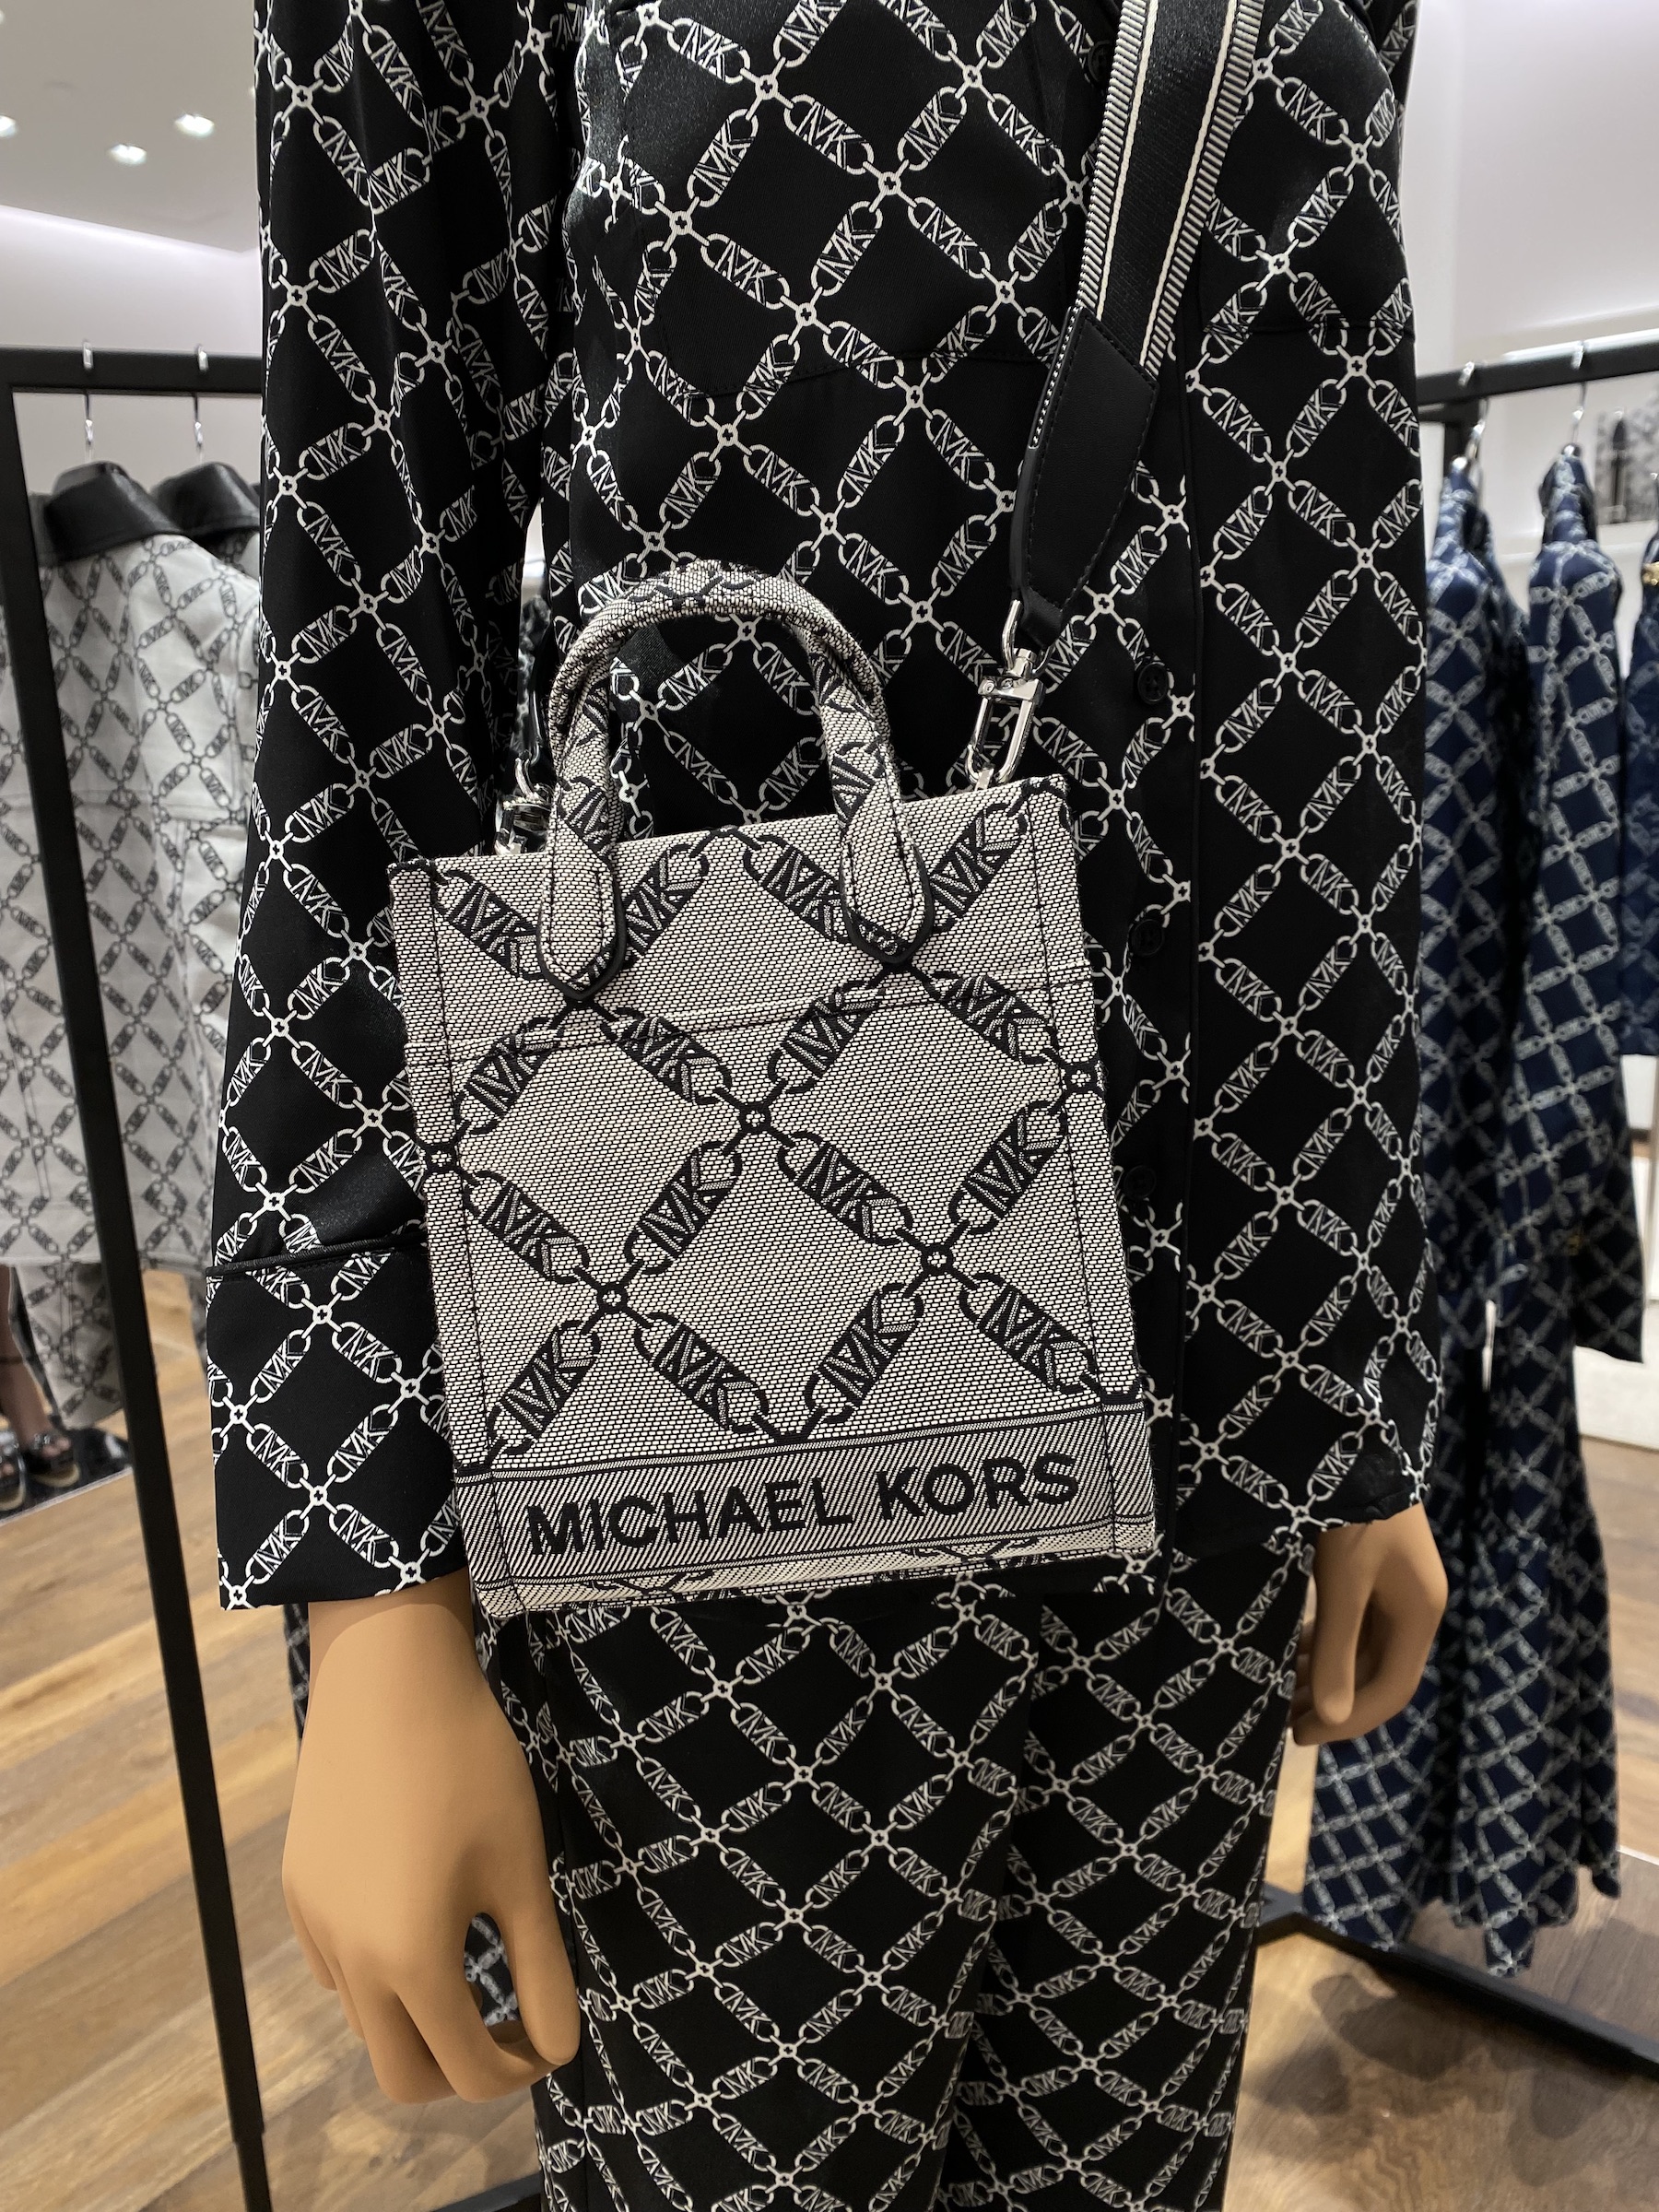 Michael Kors Opens New Concept Store in Pacific Centre